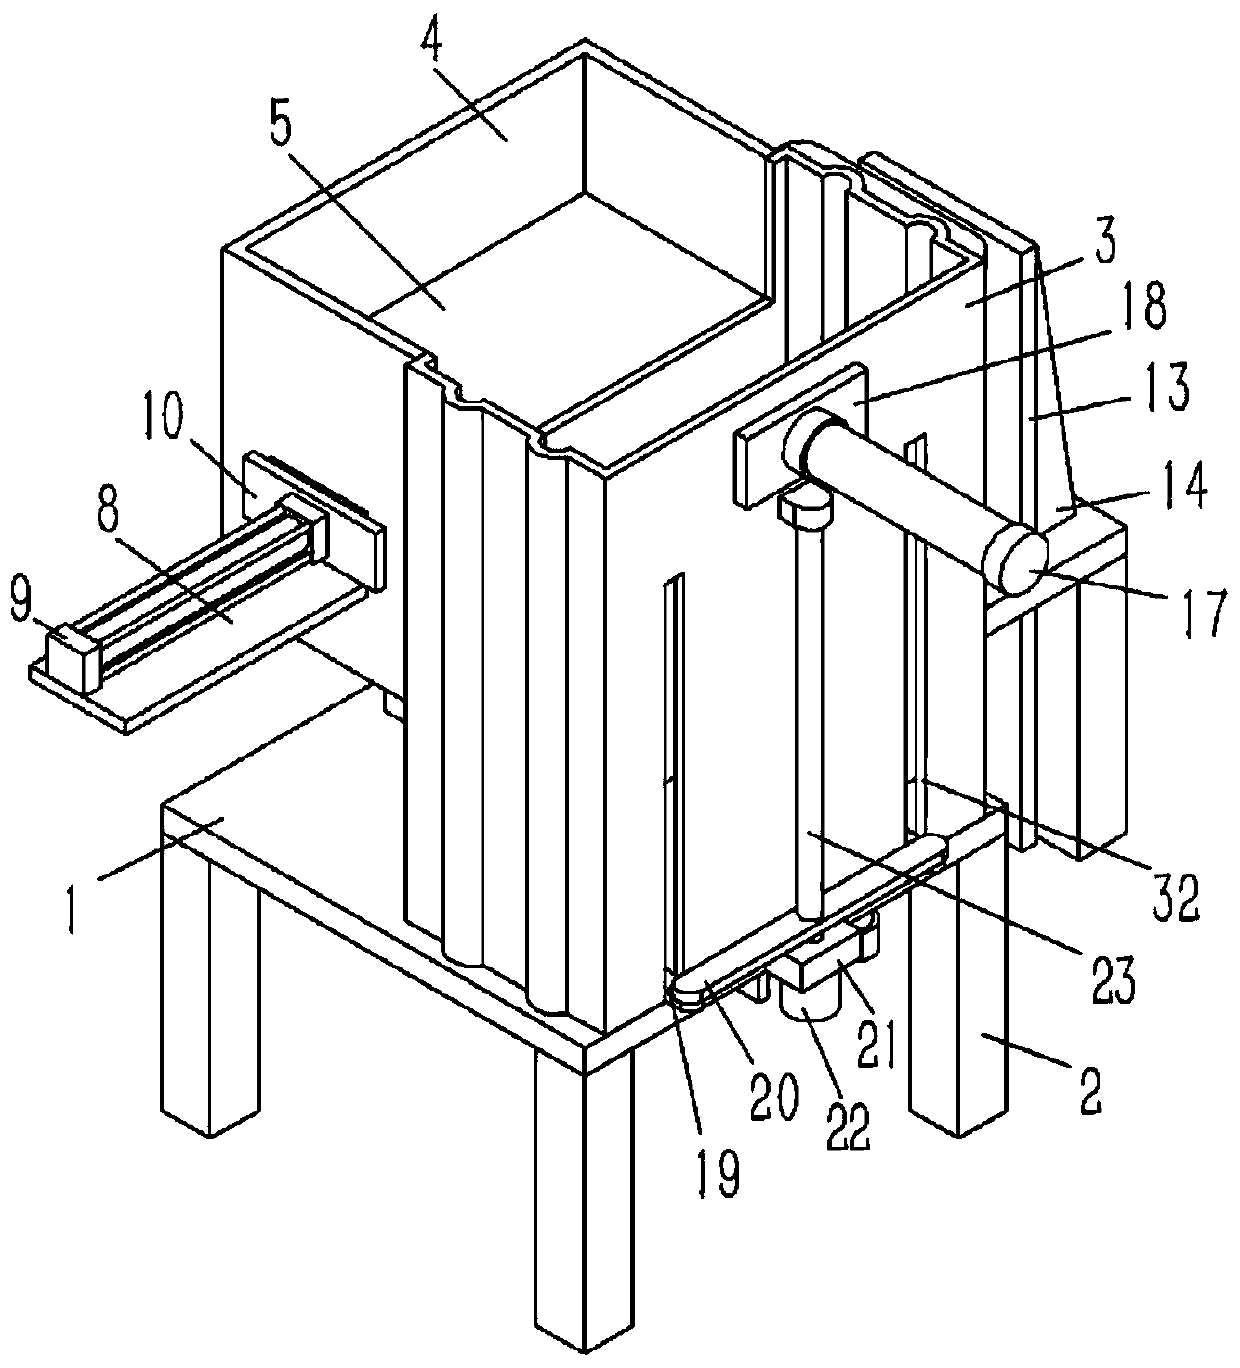 A recycling material box device for cutting capacitor legs